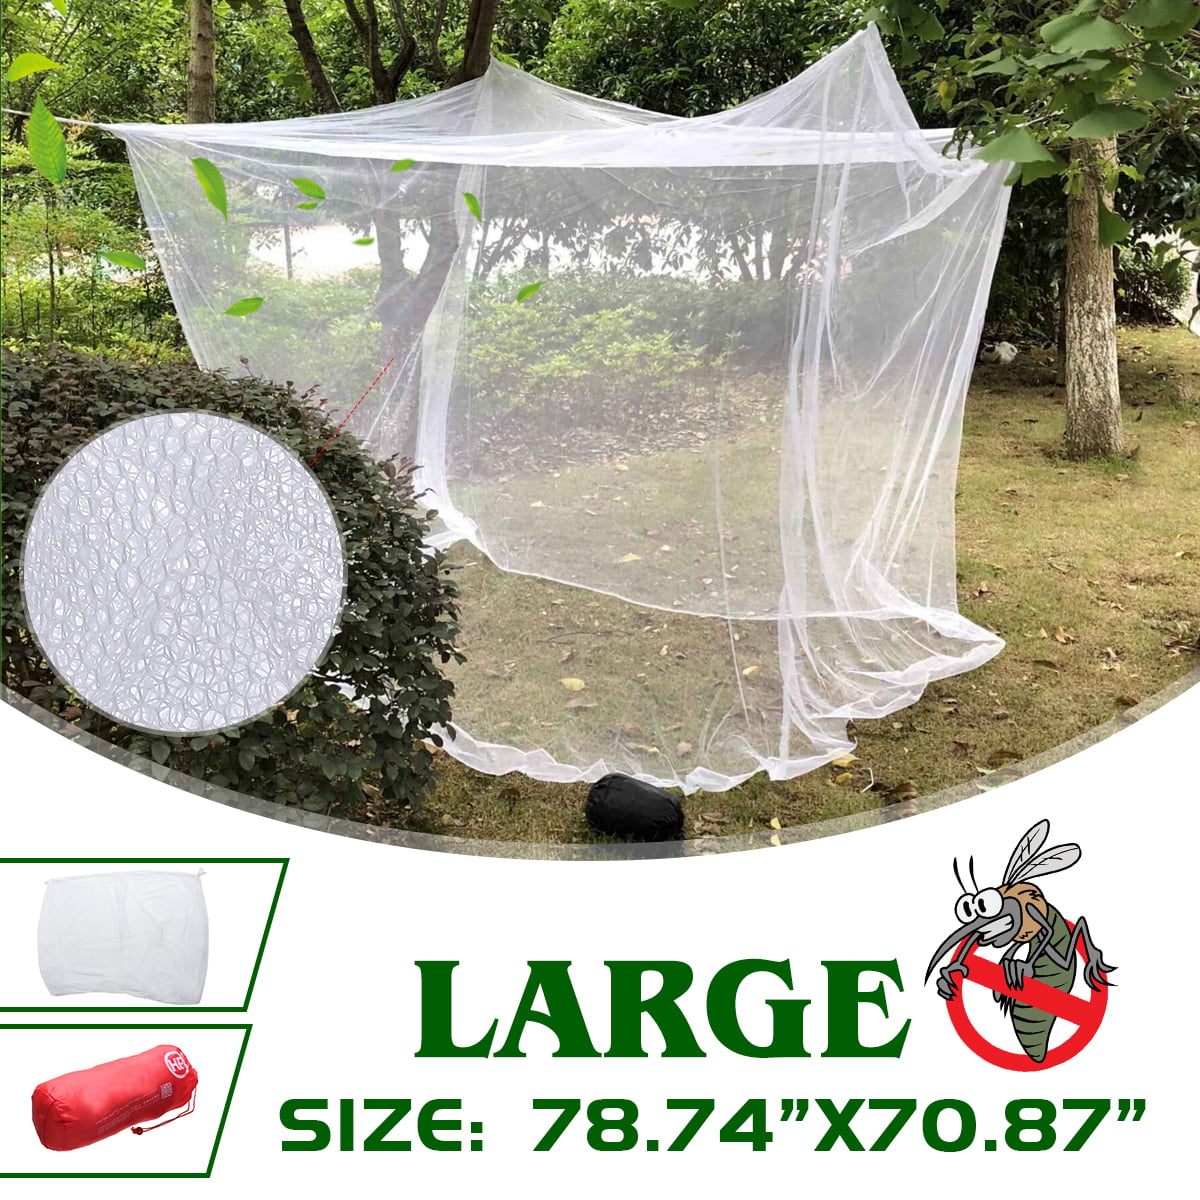 Mosquito Proof Mesh Clothing Set Bee Insect Prevent Net Suit Clothes Army G 